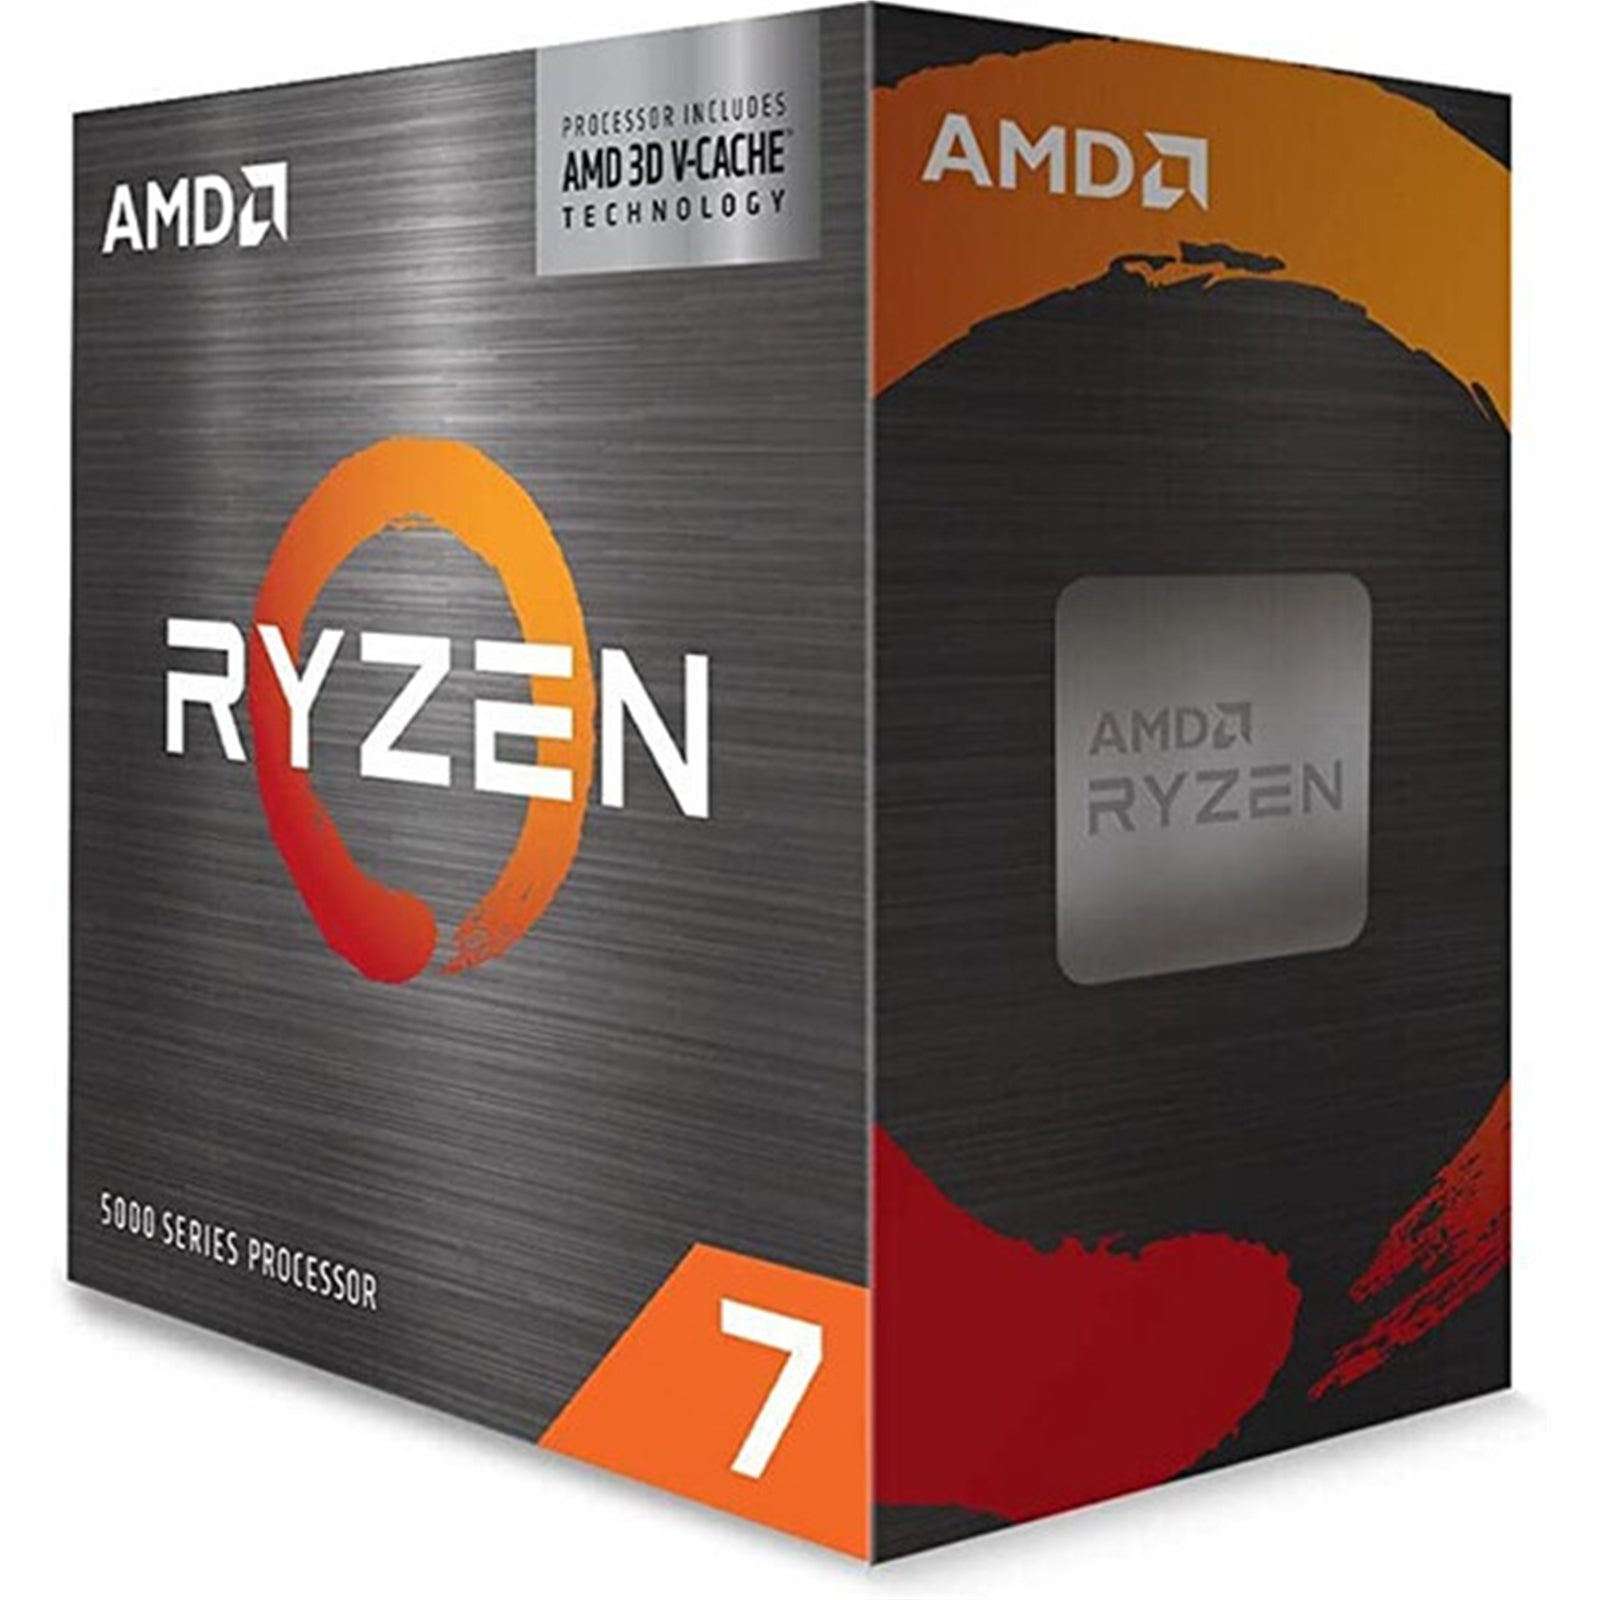 AMD Ryzen 7 5700X3D 8-Core 3.0GHz Processor High-Performance Multitasking CPU with 4.1GHz Boost